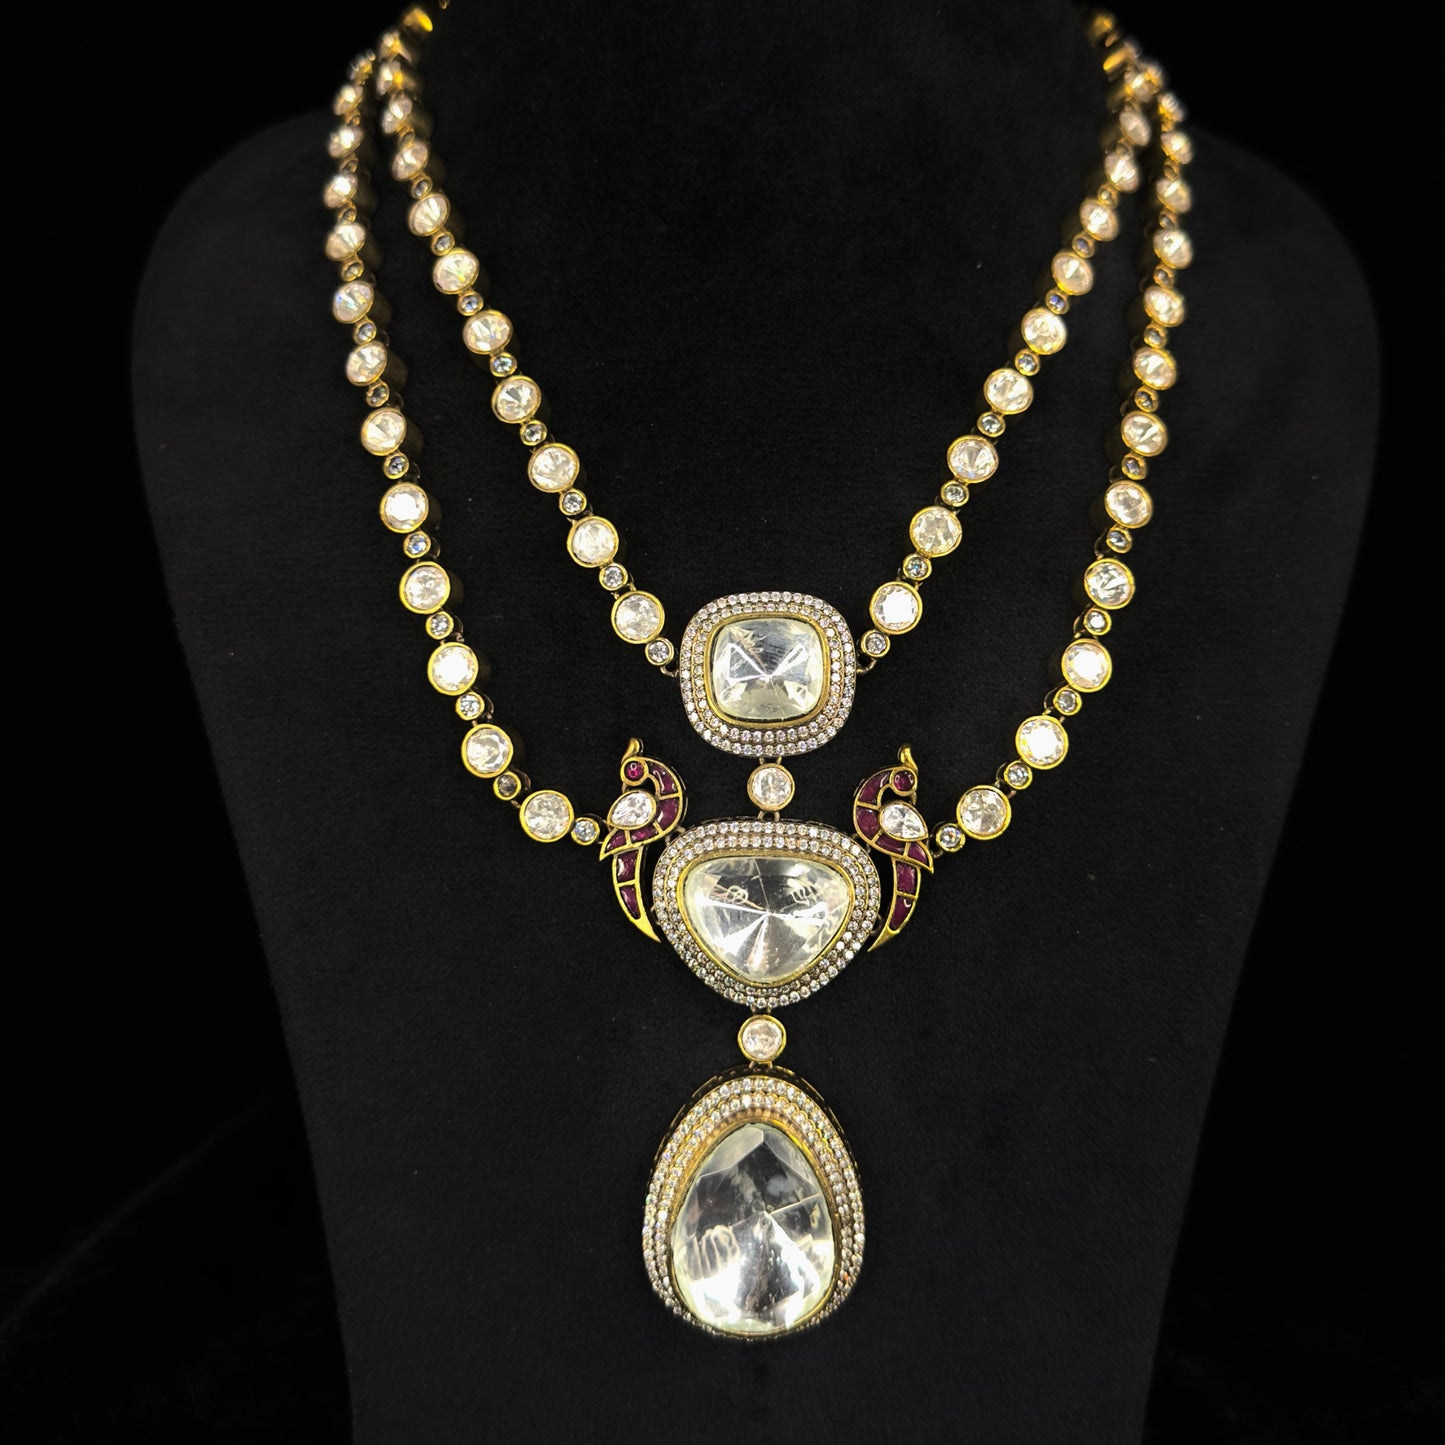 Two-Step Voguish Victorian Necklace Set with peacock motifs, zircon, moissanite polki stones, pearls, and beads, including matching earrings. This Victorian Jewellery is available in a White colour variant. 